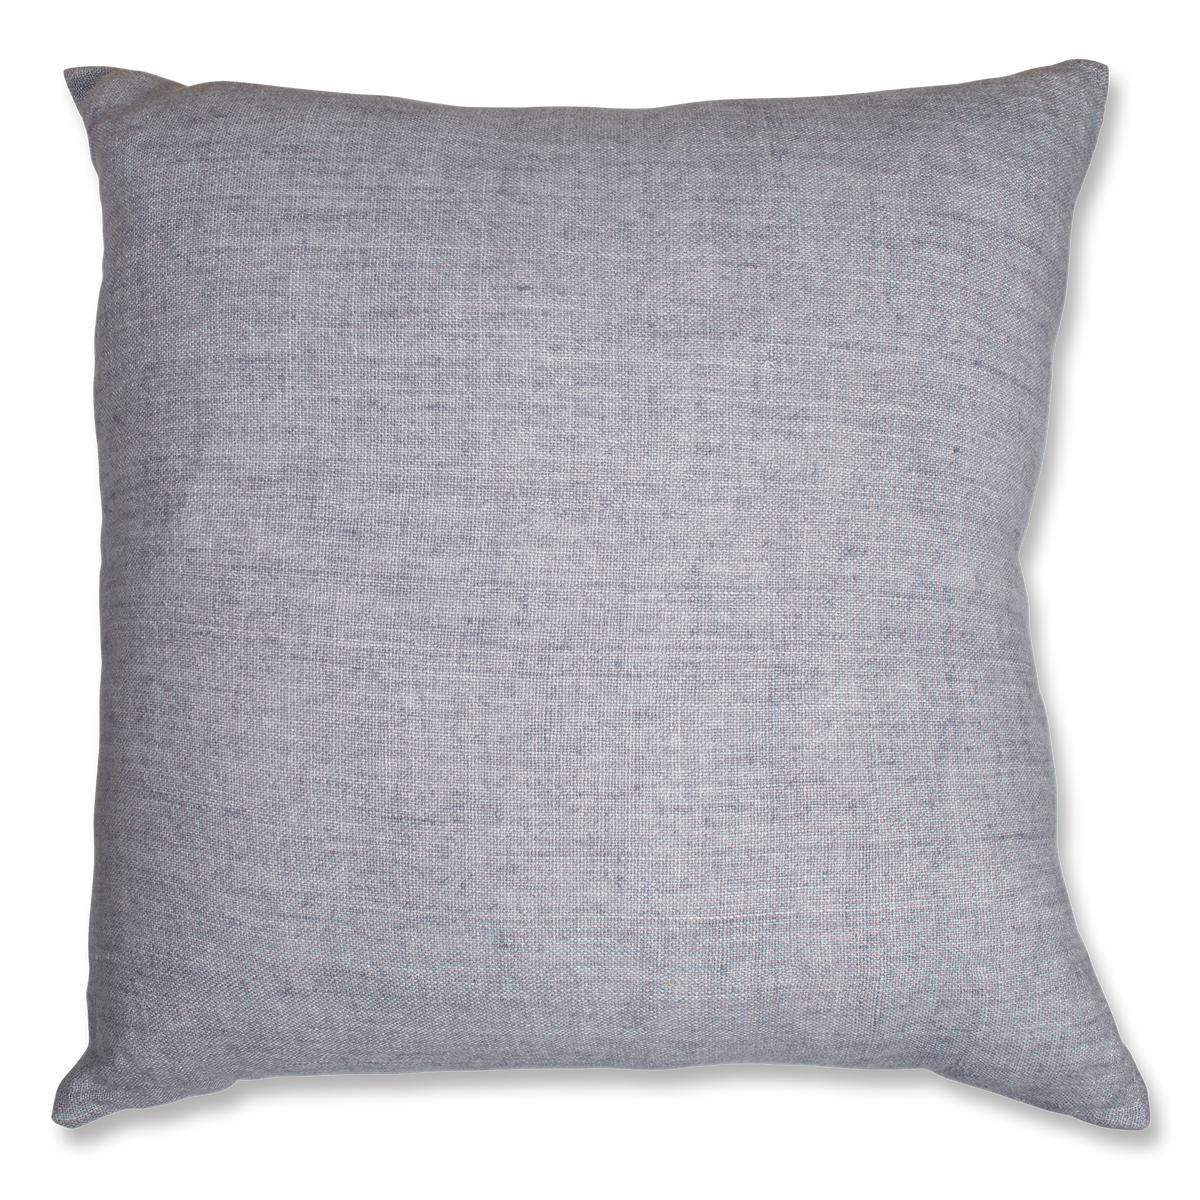 These pillows are made from pure 100% linen, rich in character and texture.